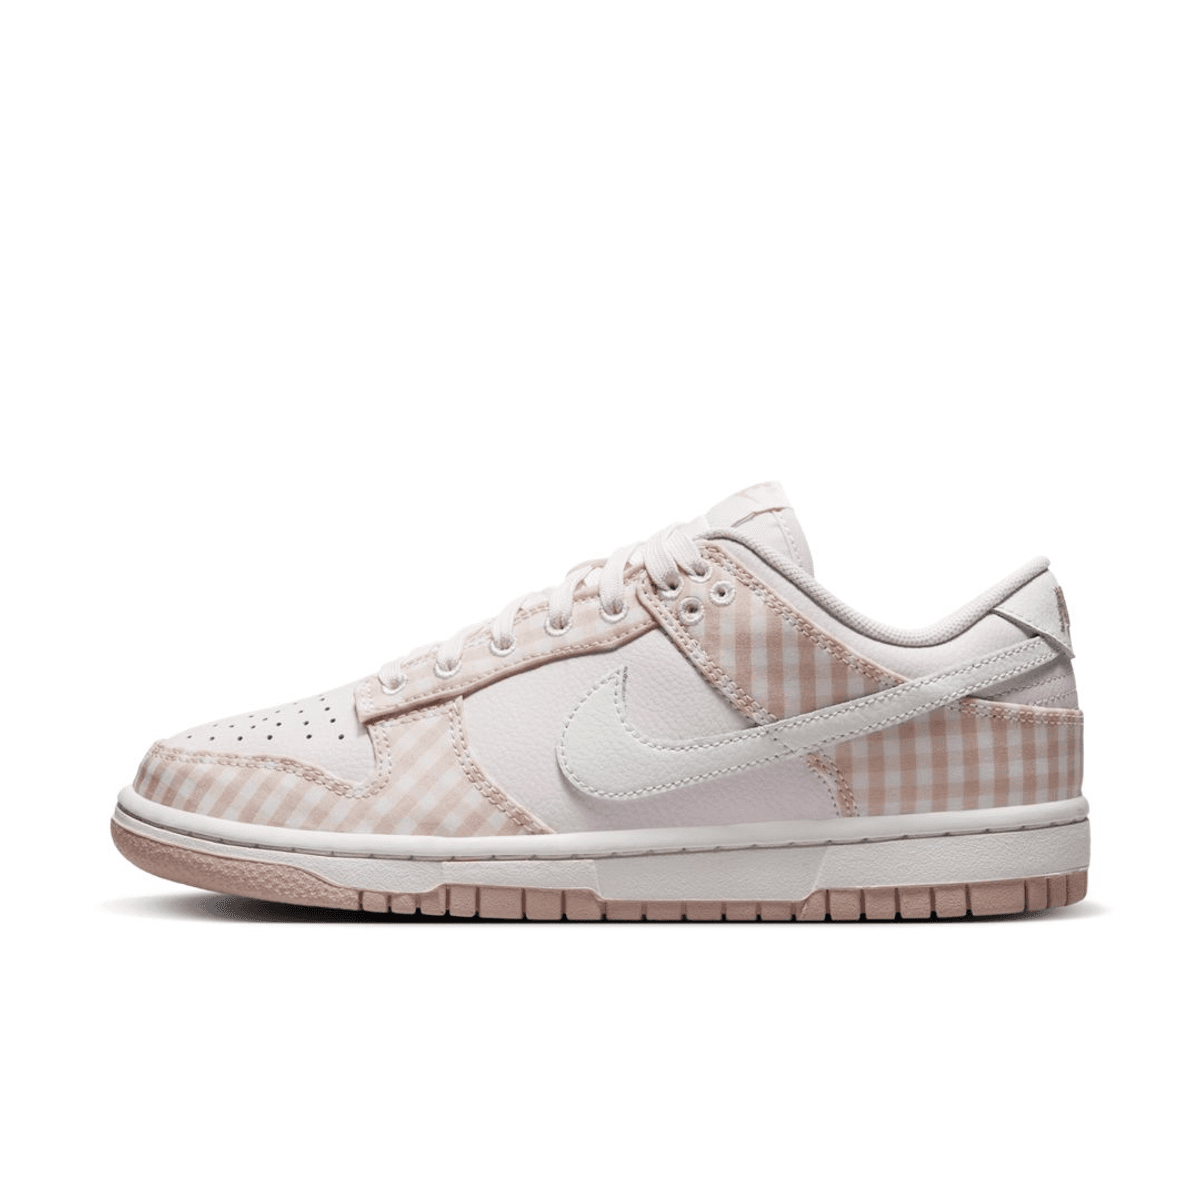 Official Images Of The Nike Dunk Low "Pink Gingham"